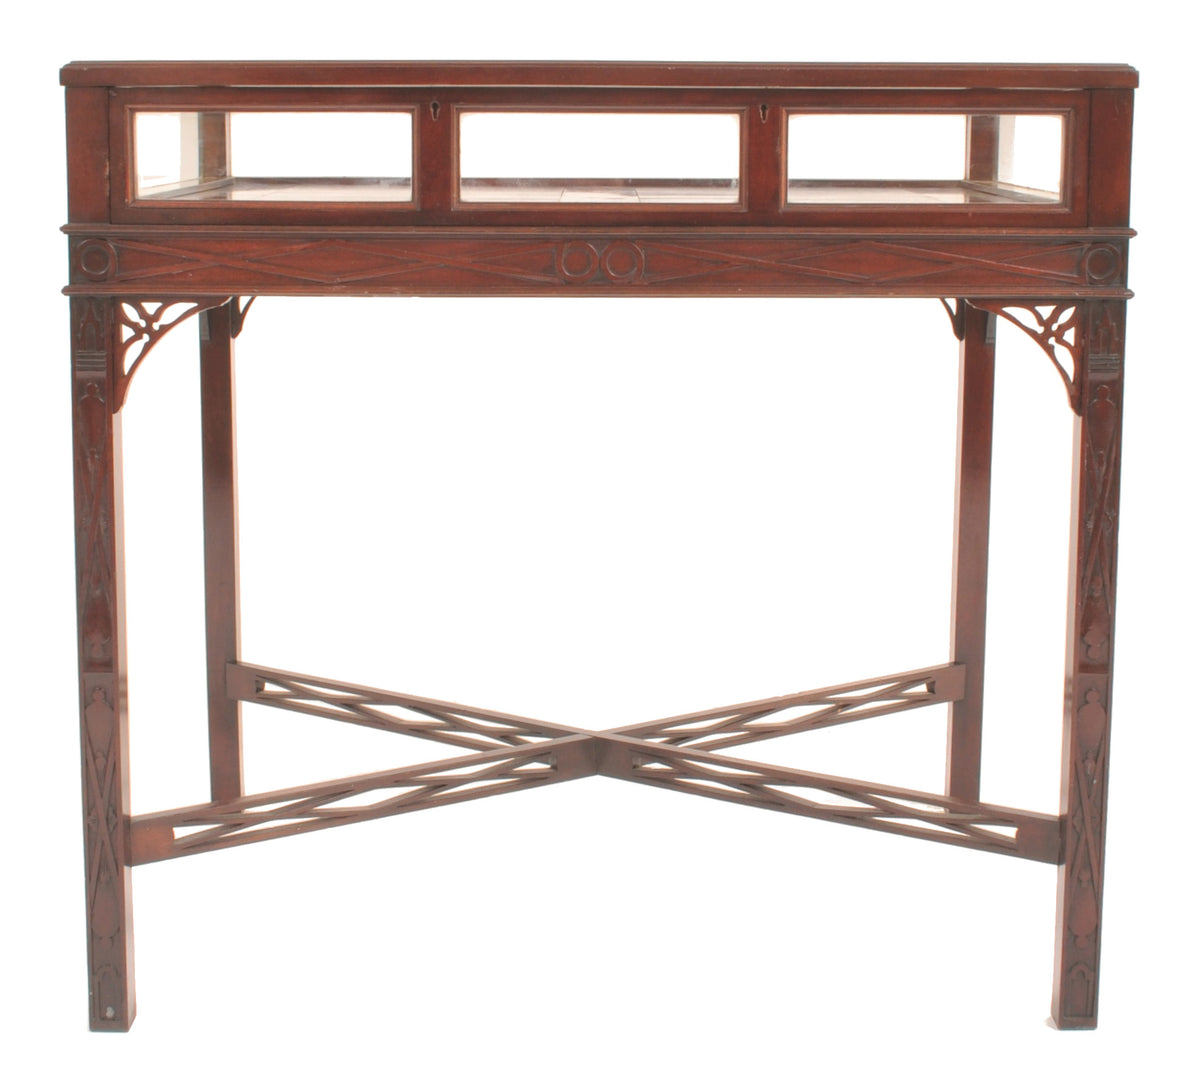 Antique Edwardian George III Chinese Chippendale Style Bijouterie Table / Vitrine / Display Case, Circa 1900